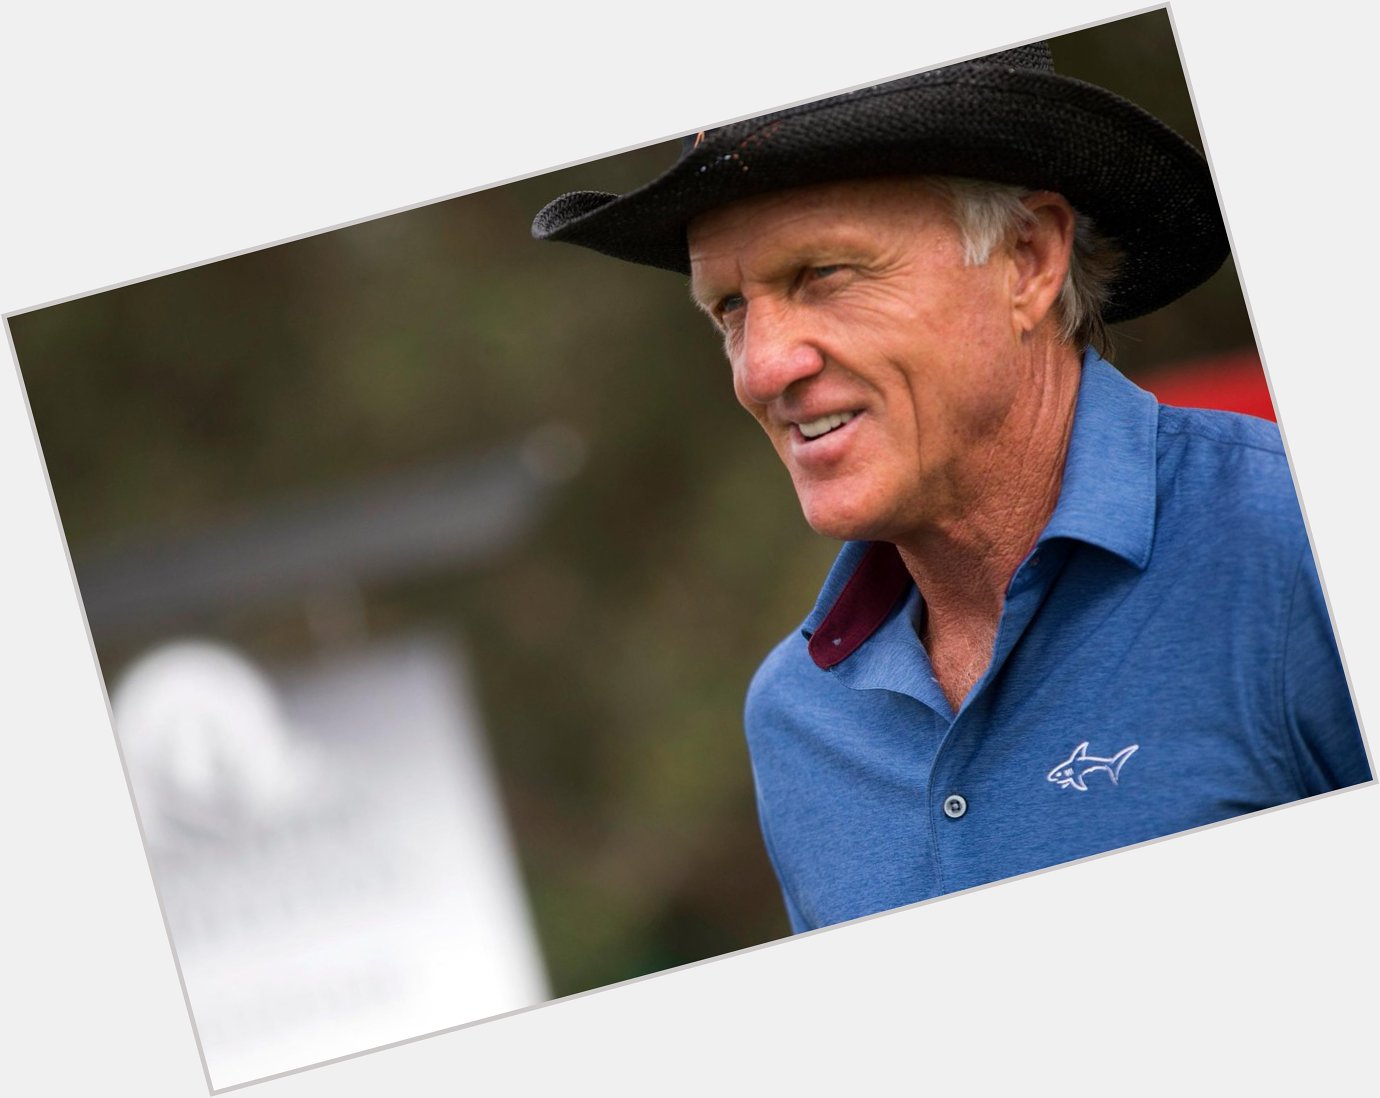 Join us in wishing a happy 61st birthday to The Shark, Greg Norman 